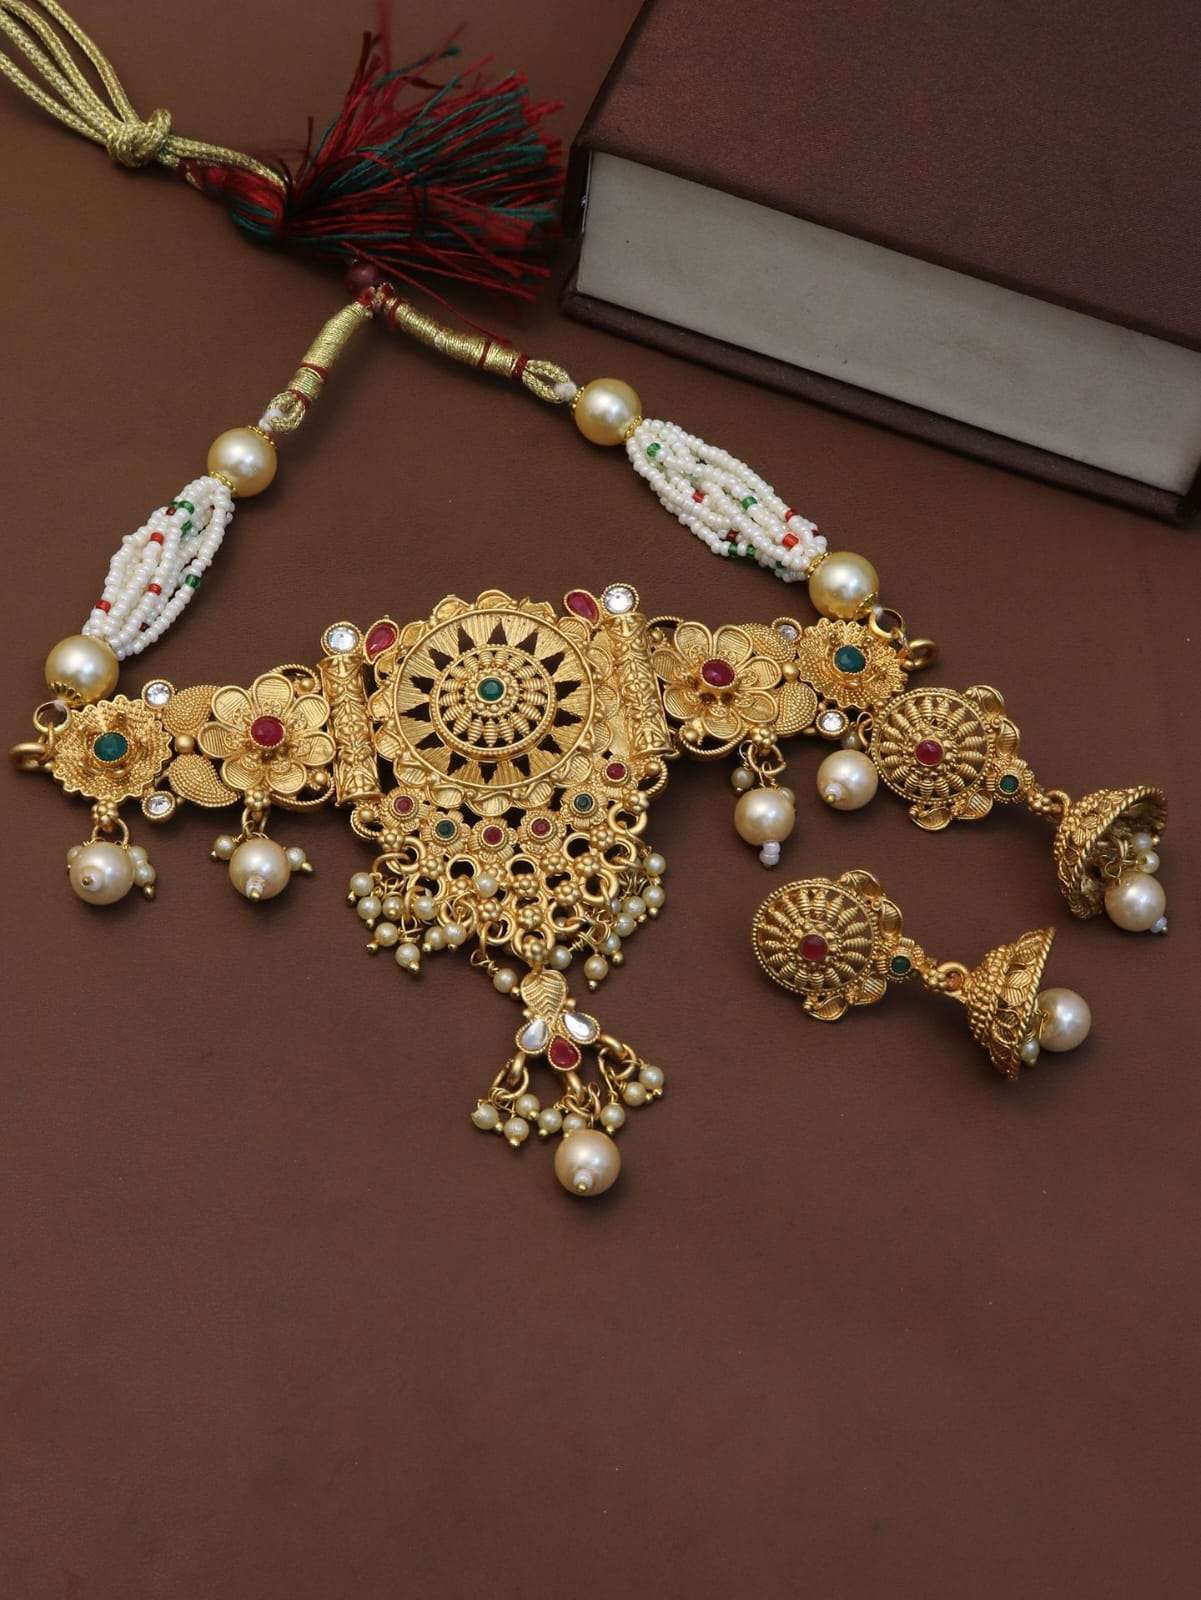 S-604 SERIES BY FASHID WHOLESALE 604 TO 605 SERIES TRADITIONAL ARTIFICIAL JEWELLERY FOR INDIAN ATTIRE AT EXCLUSIVE RANGE.